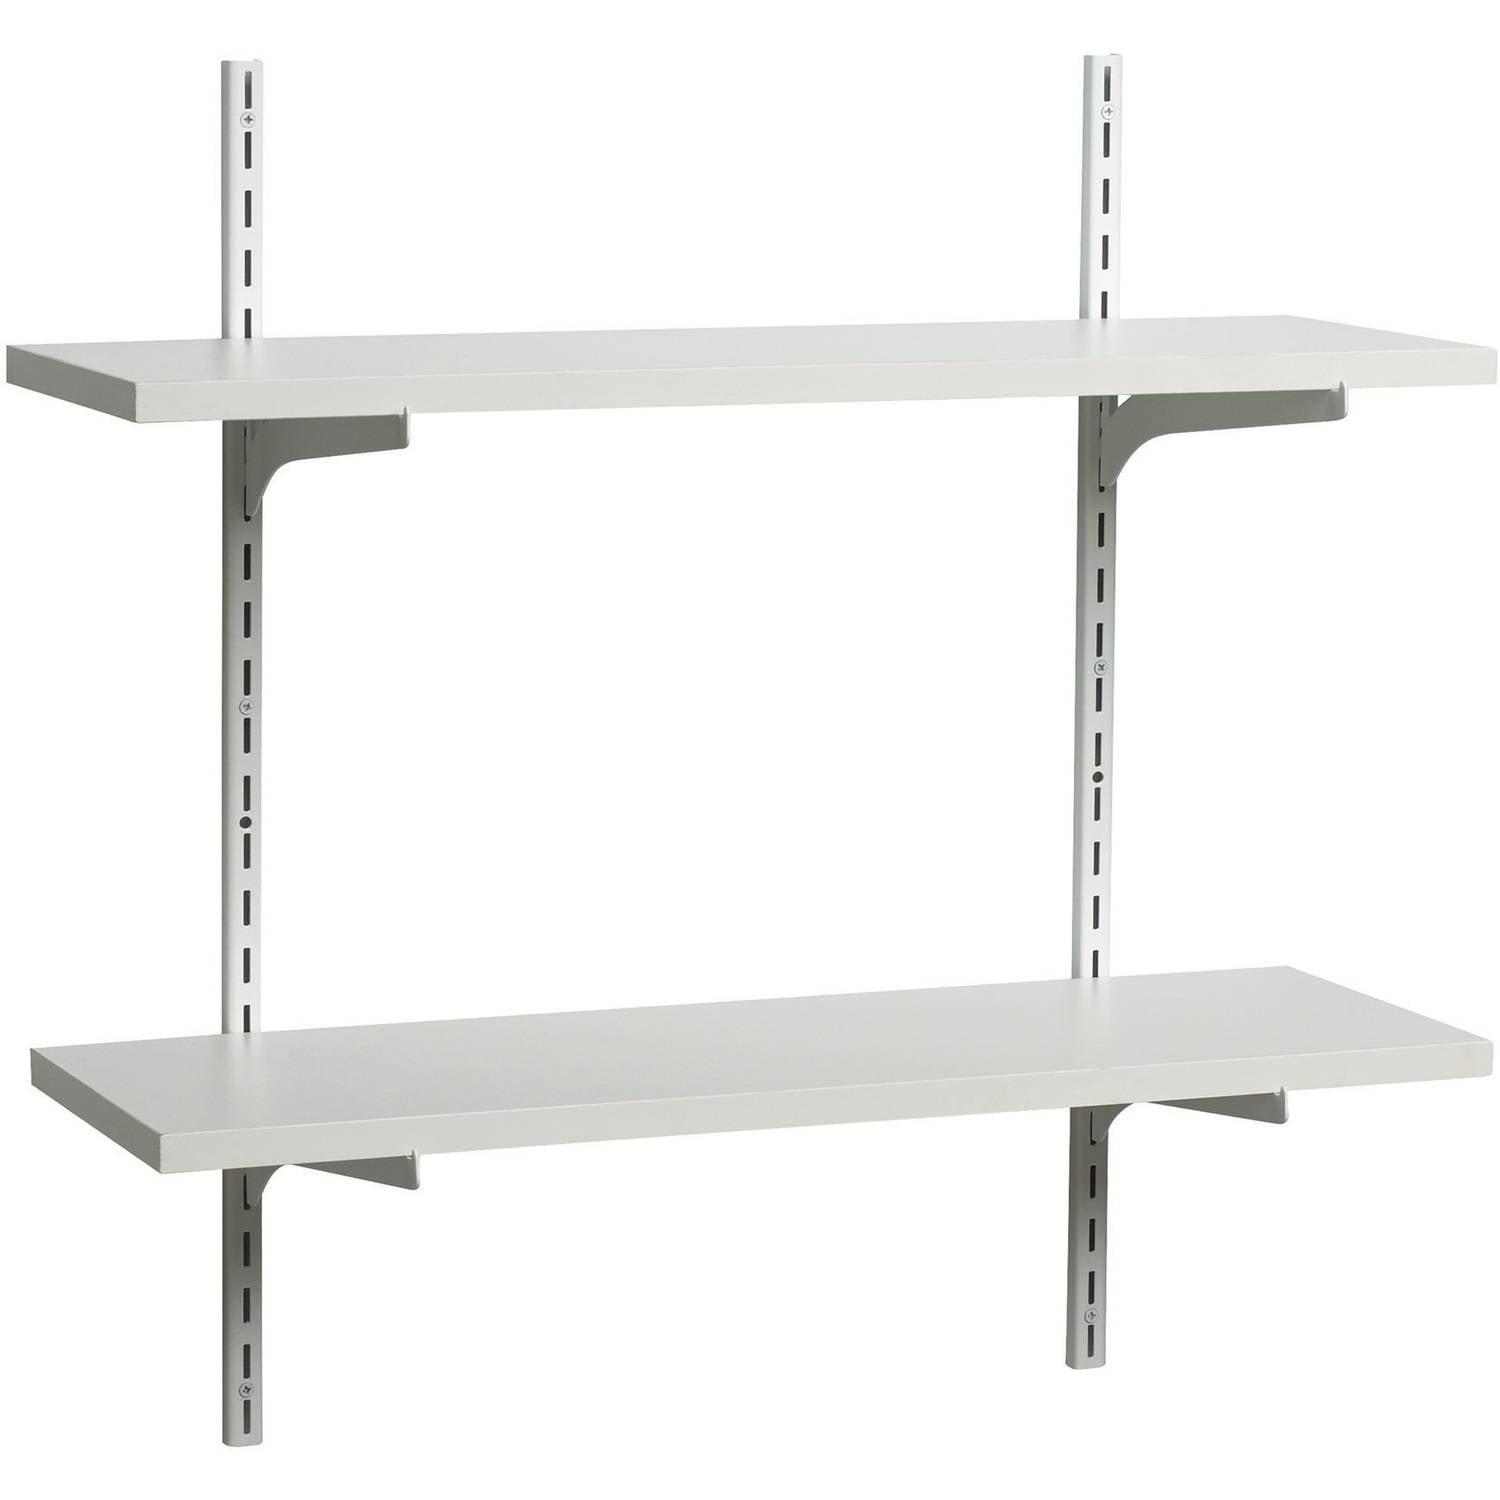 Generic Shelf Made  White  Finish 8 in x 24 in Adjustable  